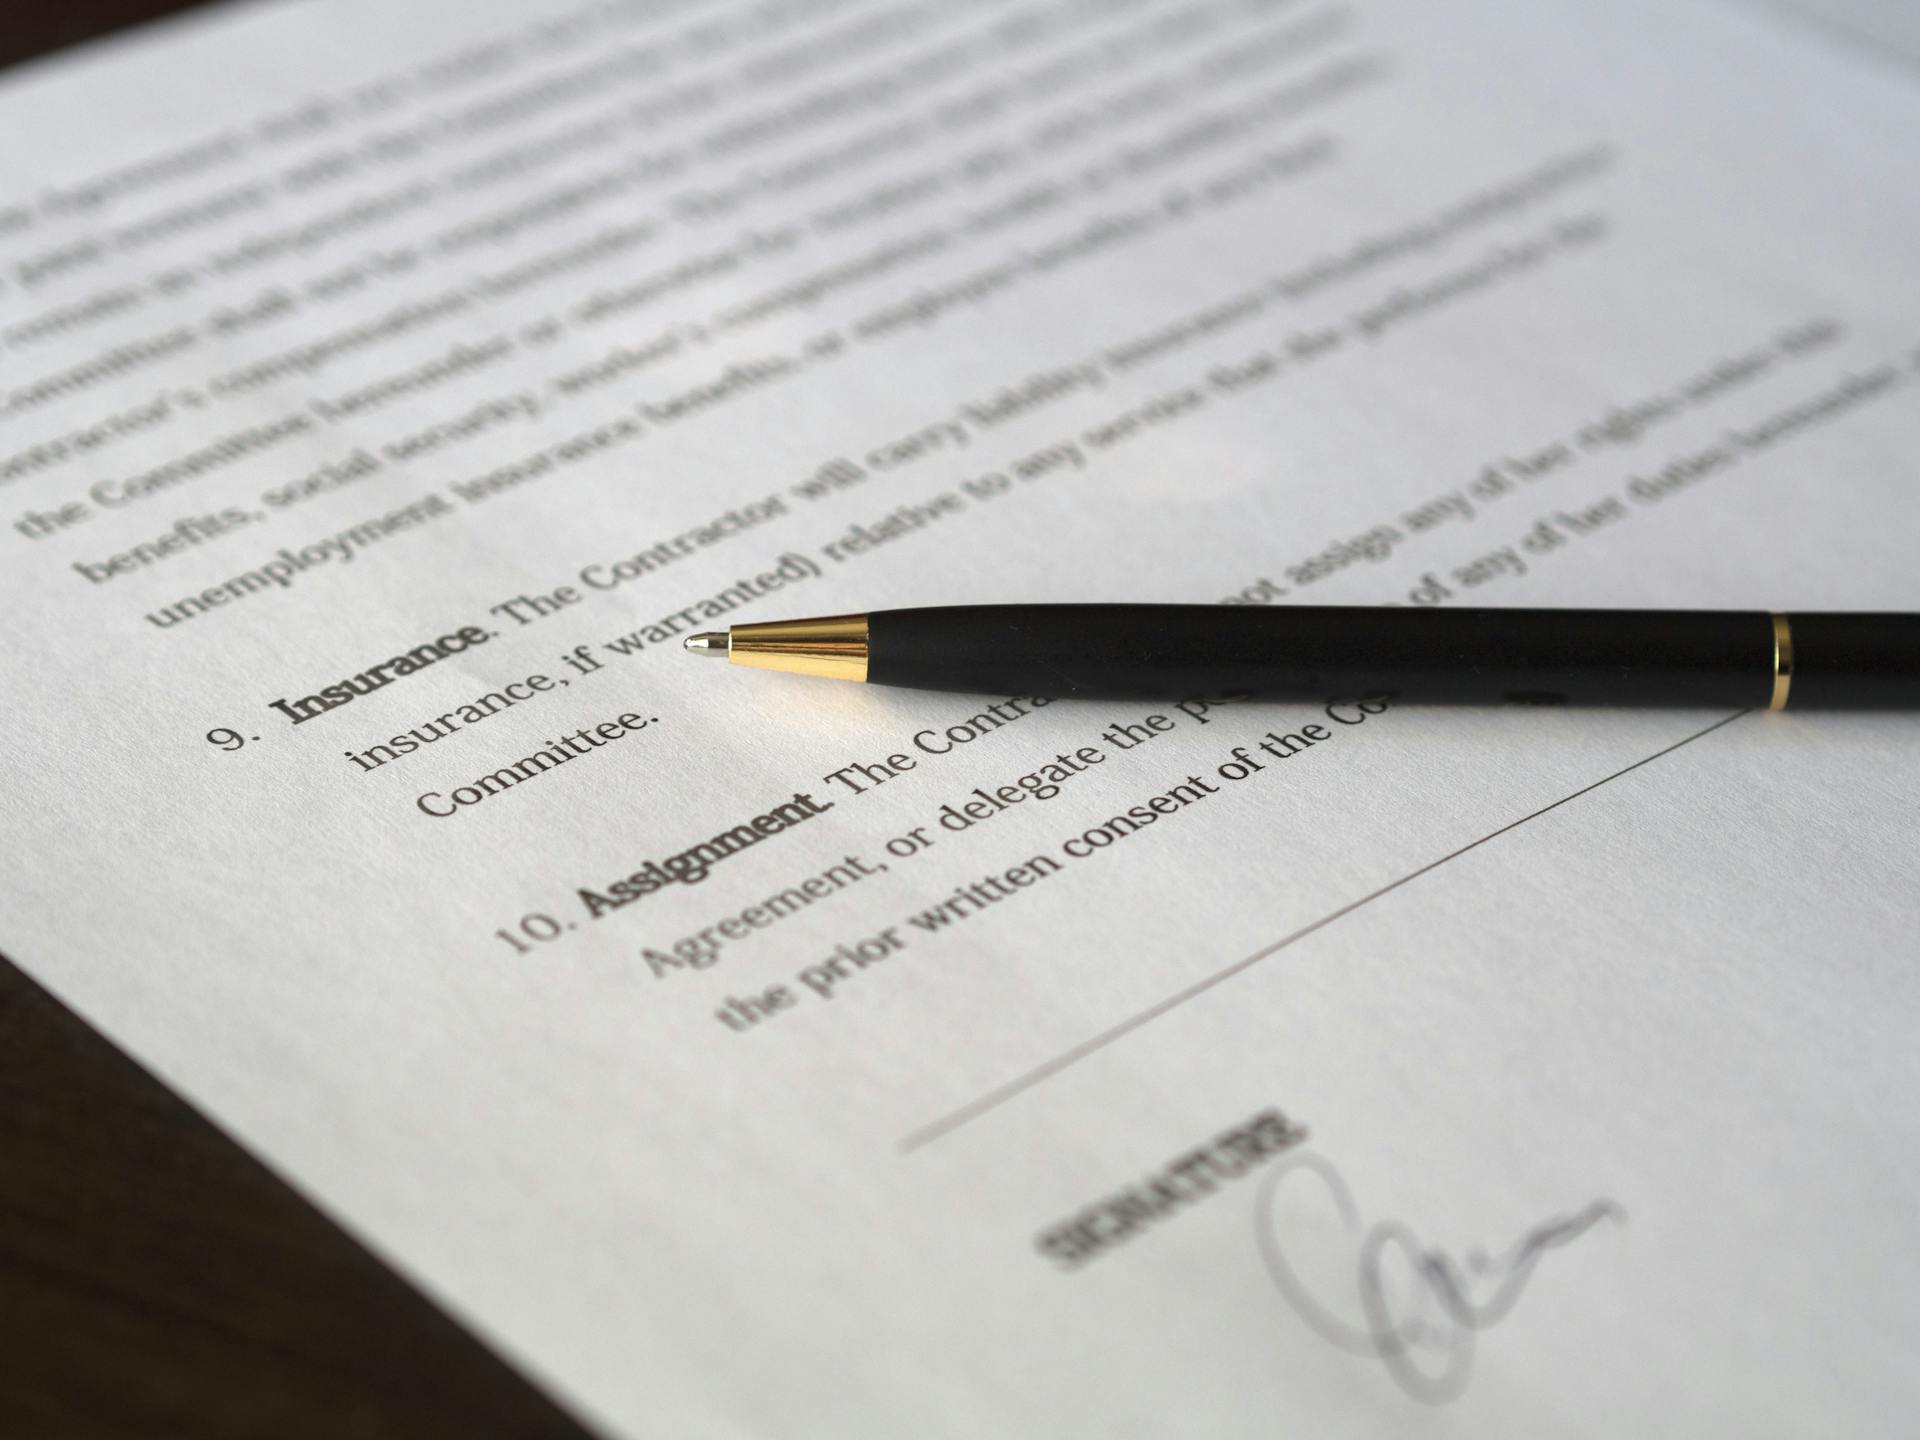 A signed agreement | Source: Pexels